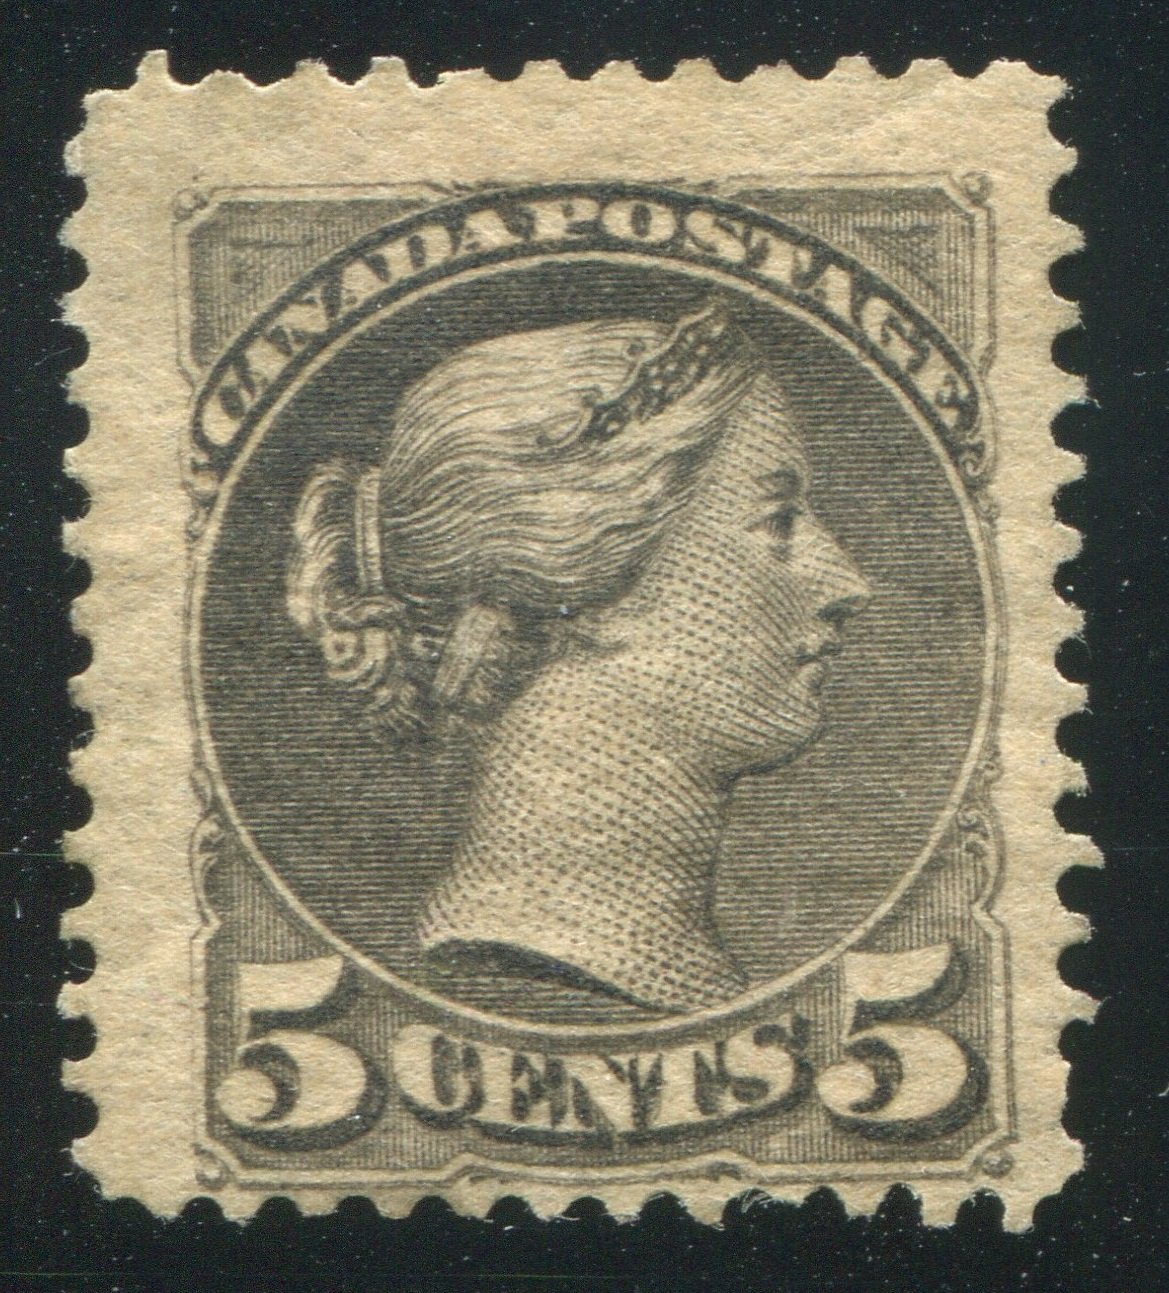 0042CA1710 - Canada #42 - Mint - UNLISTED, Constant Variety?